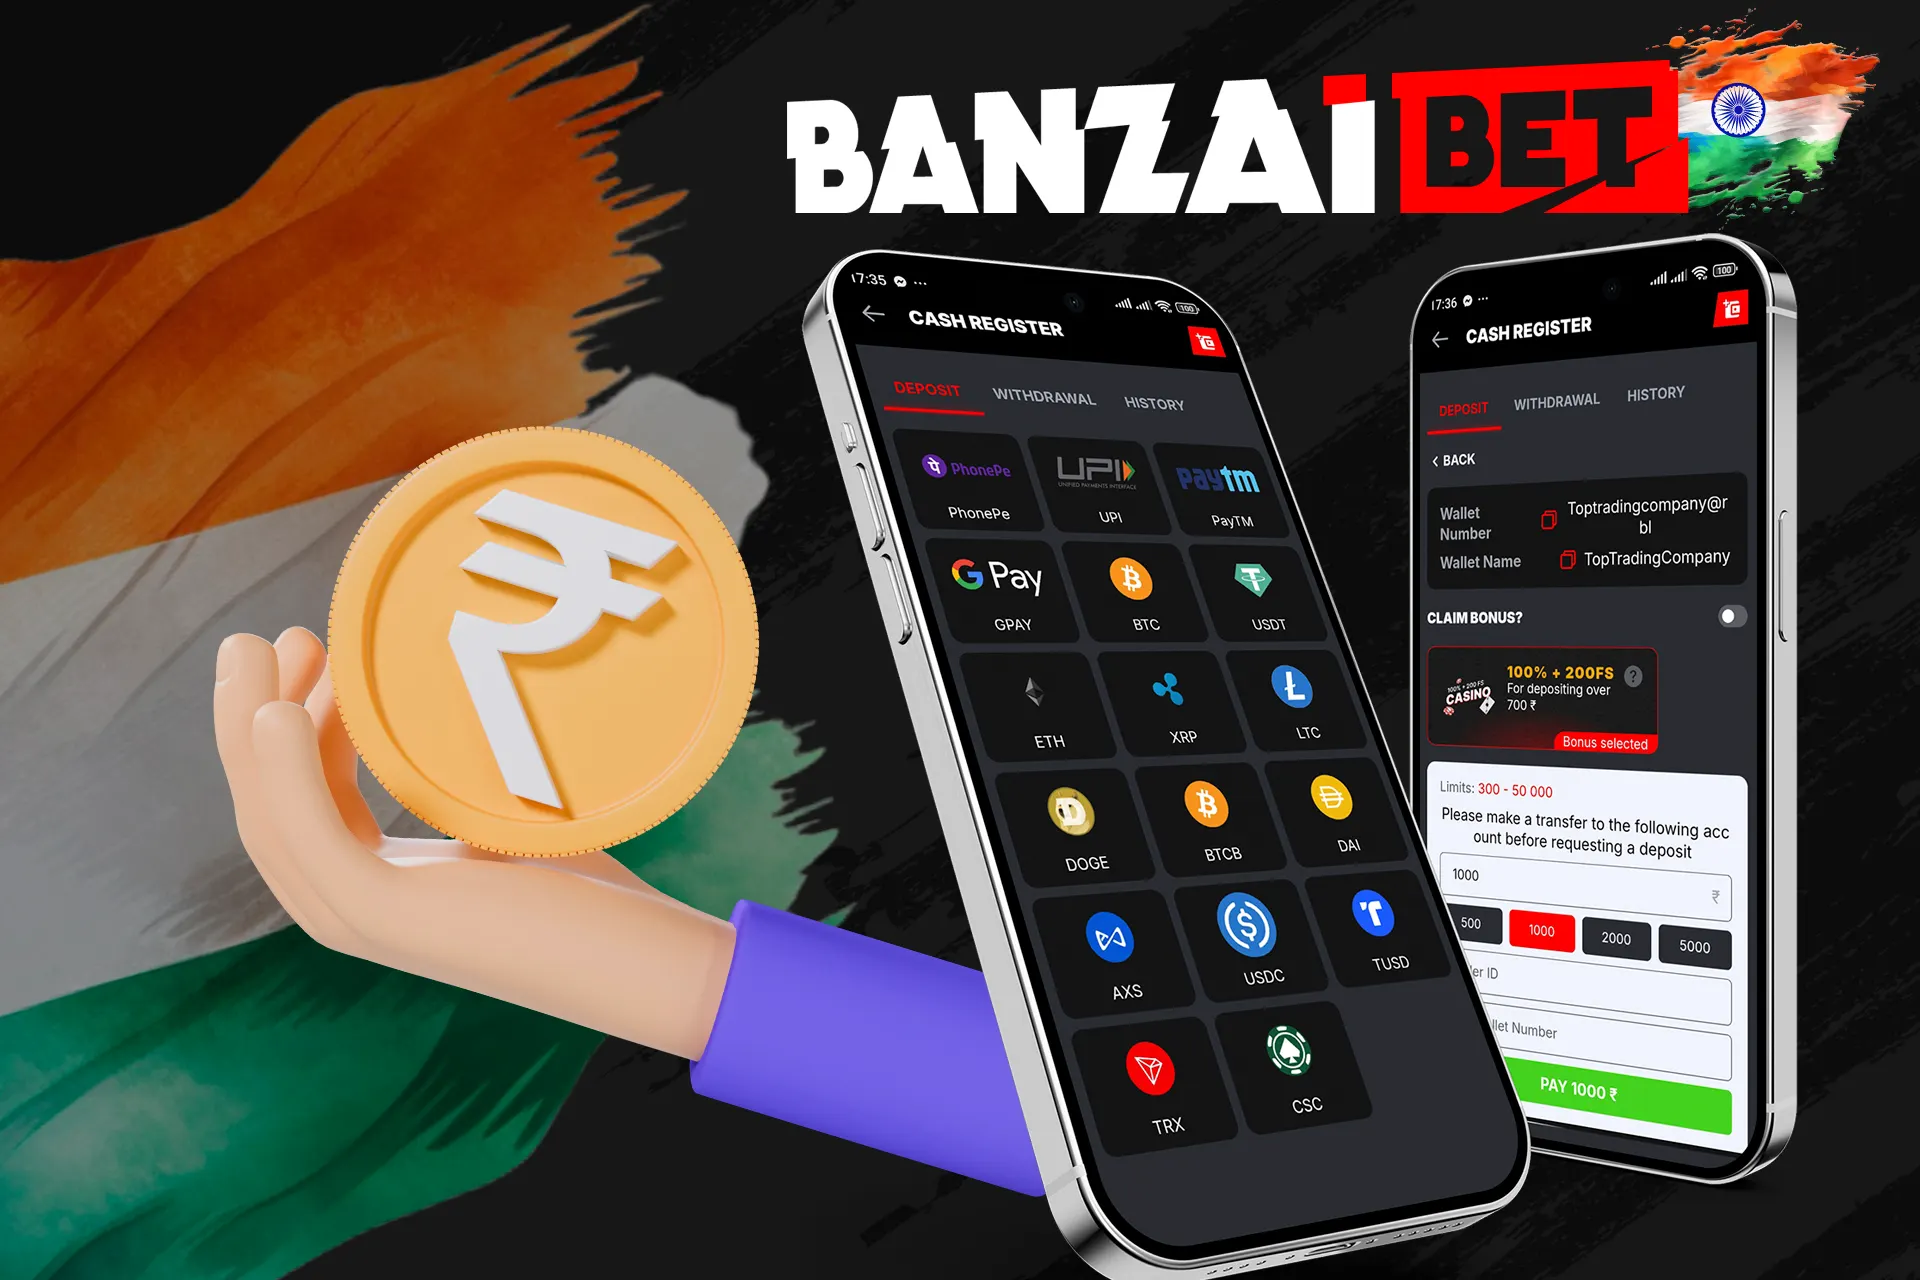 Make your first deposit using the Banzaibet India mobile app